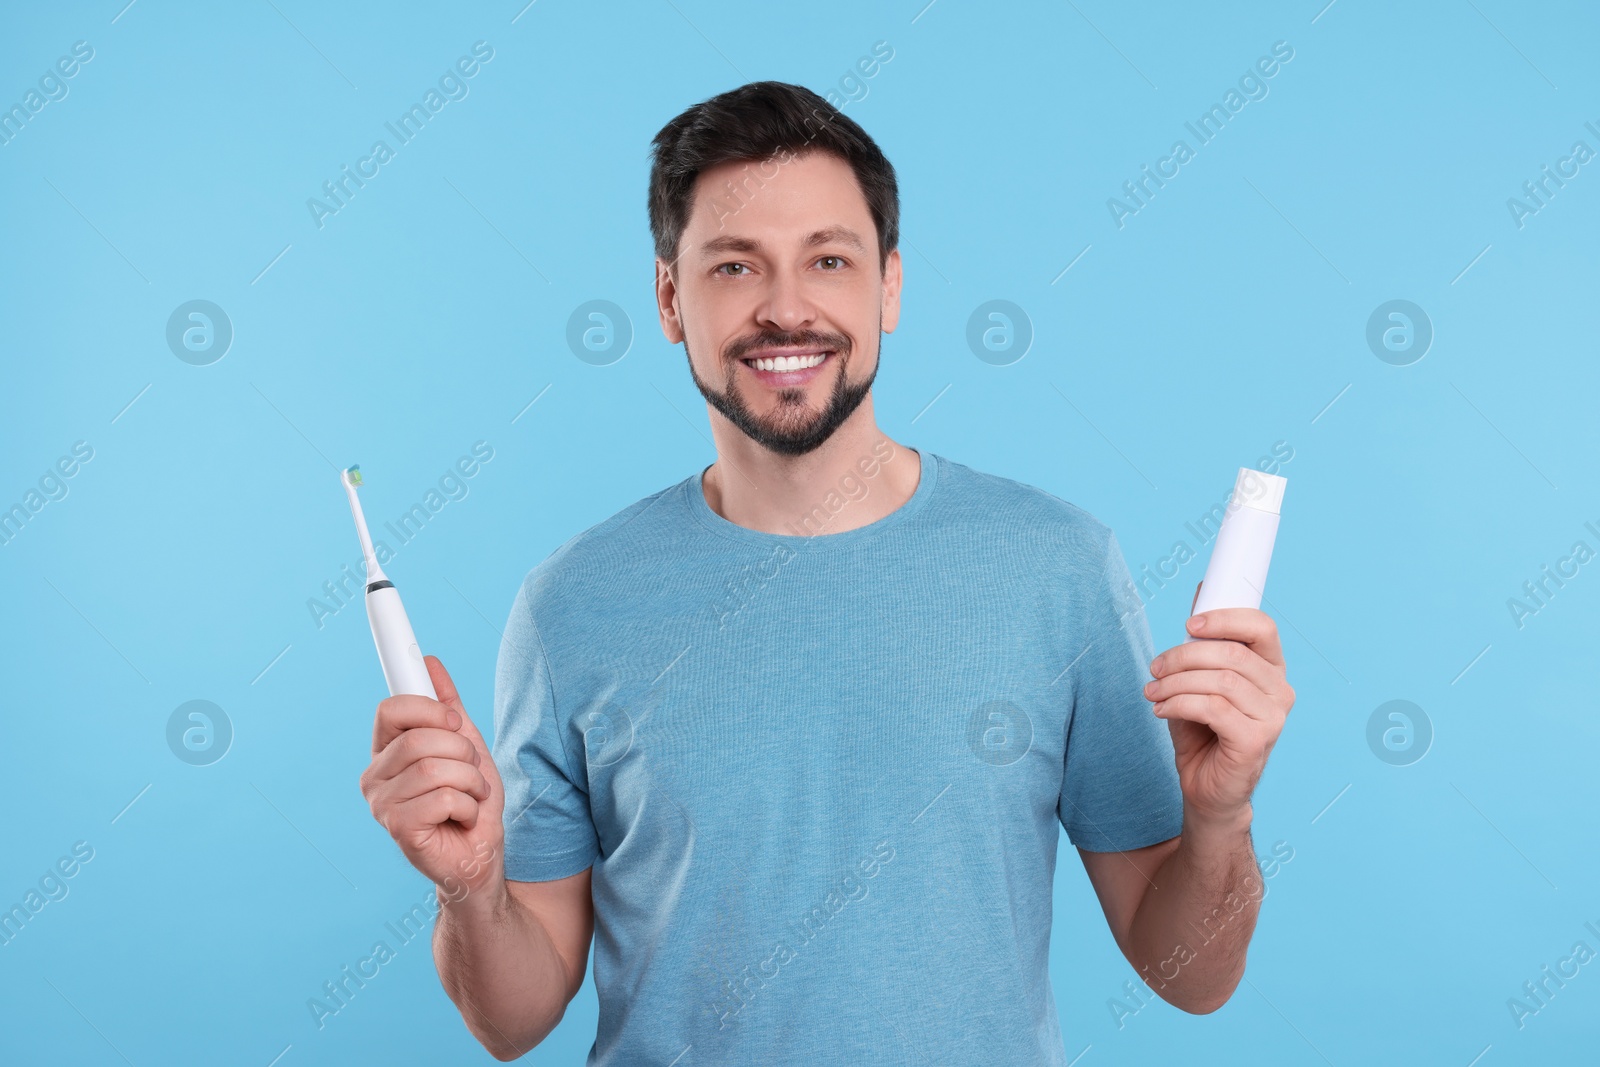 Photo of Happy man holding electric toothbrush and tube of toothpaste on light blue background